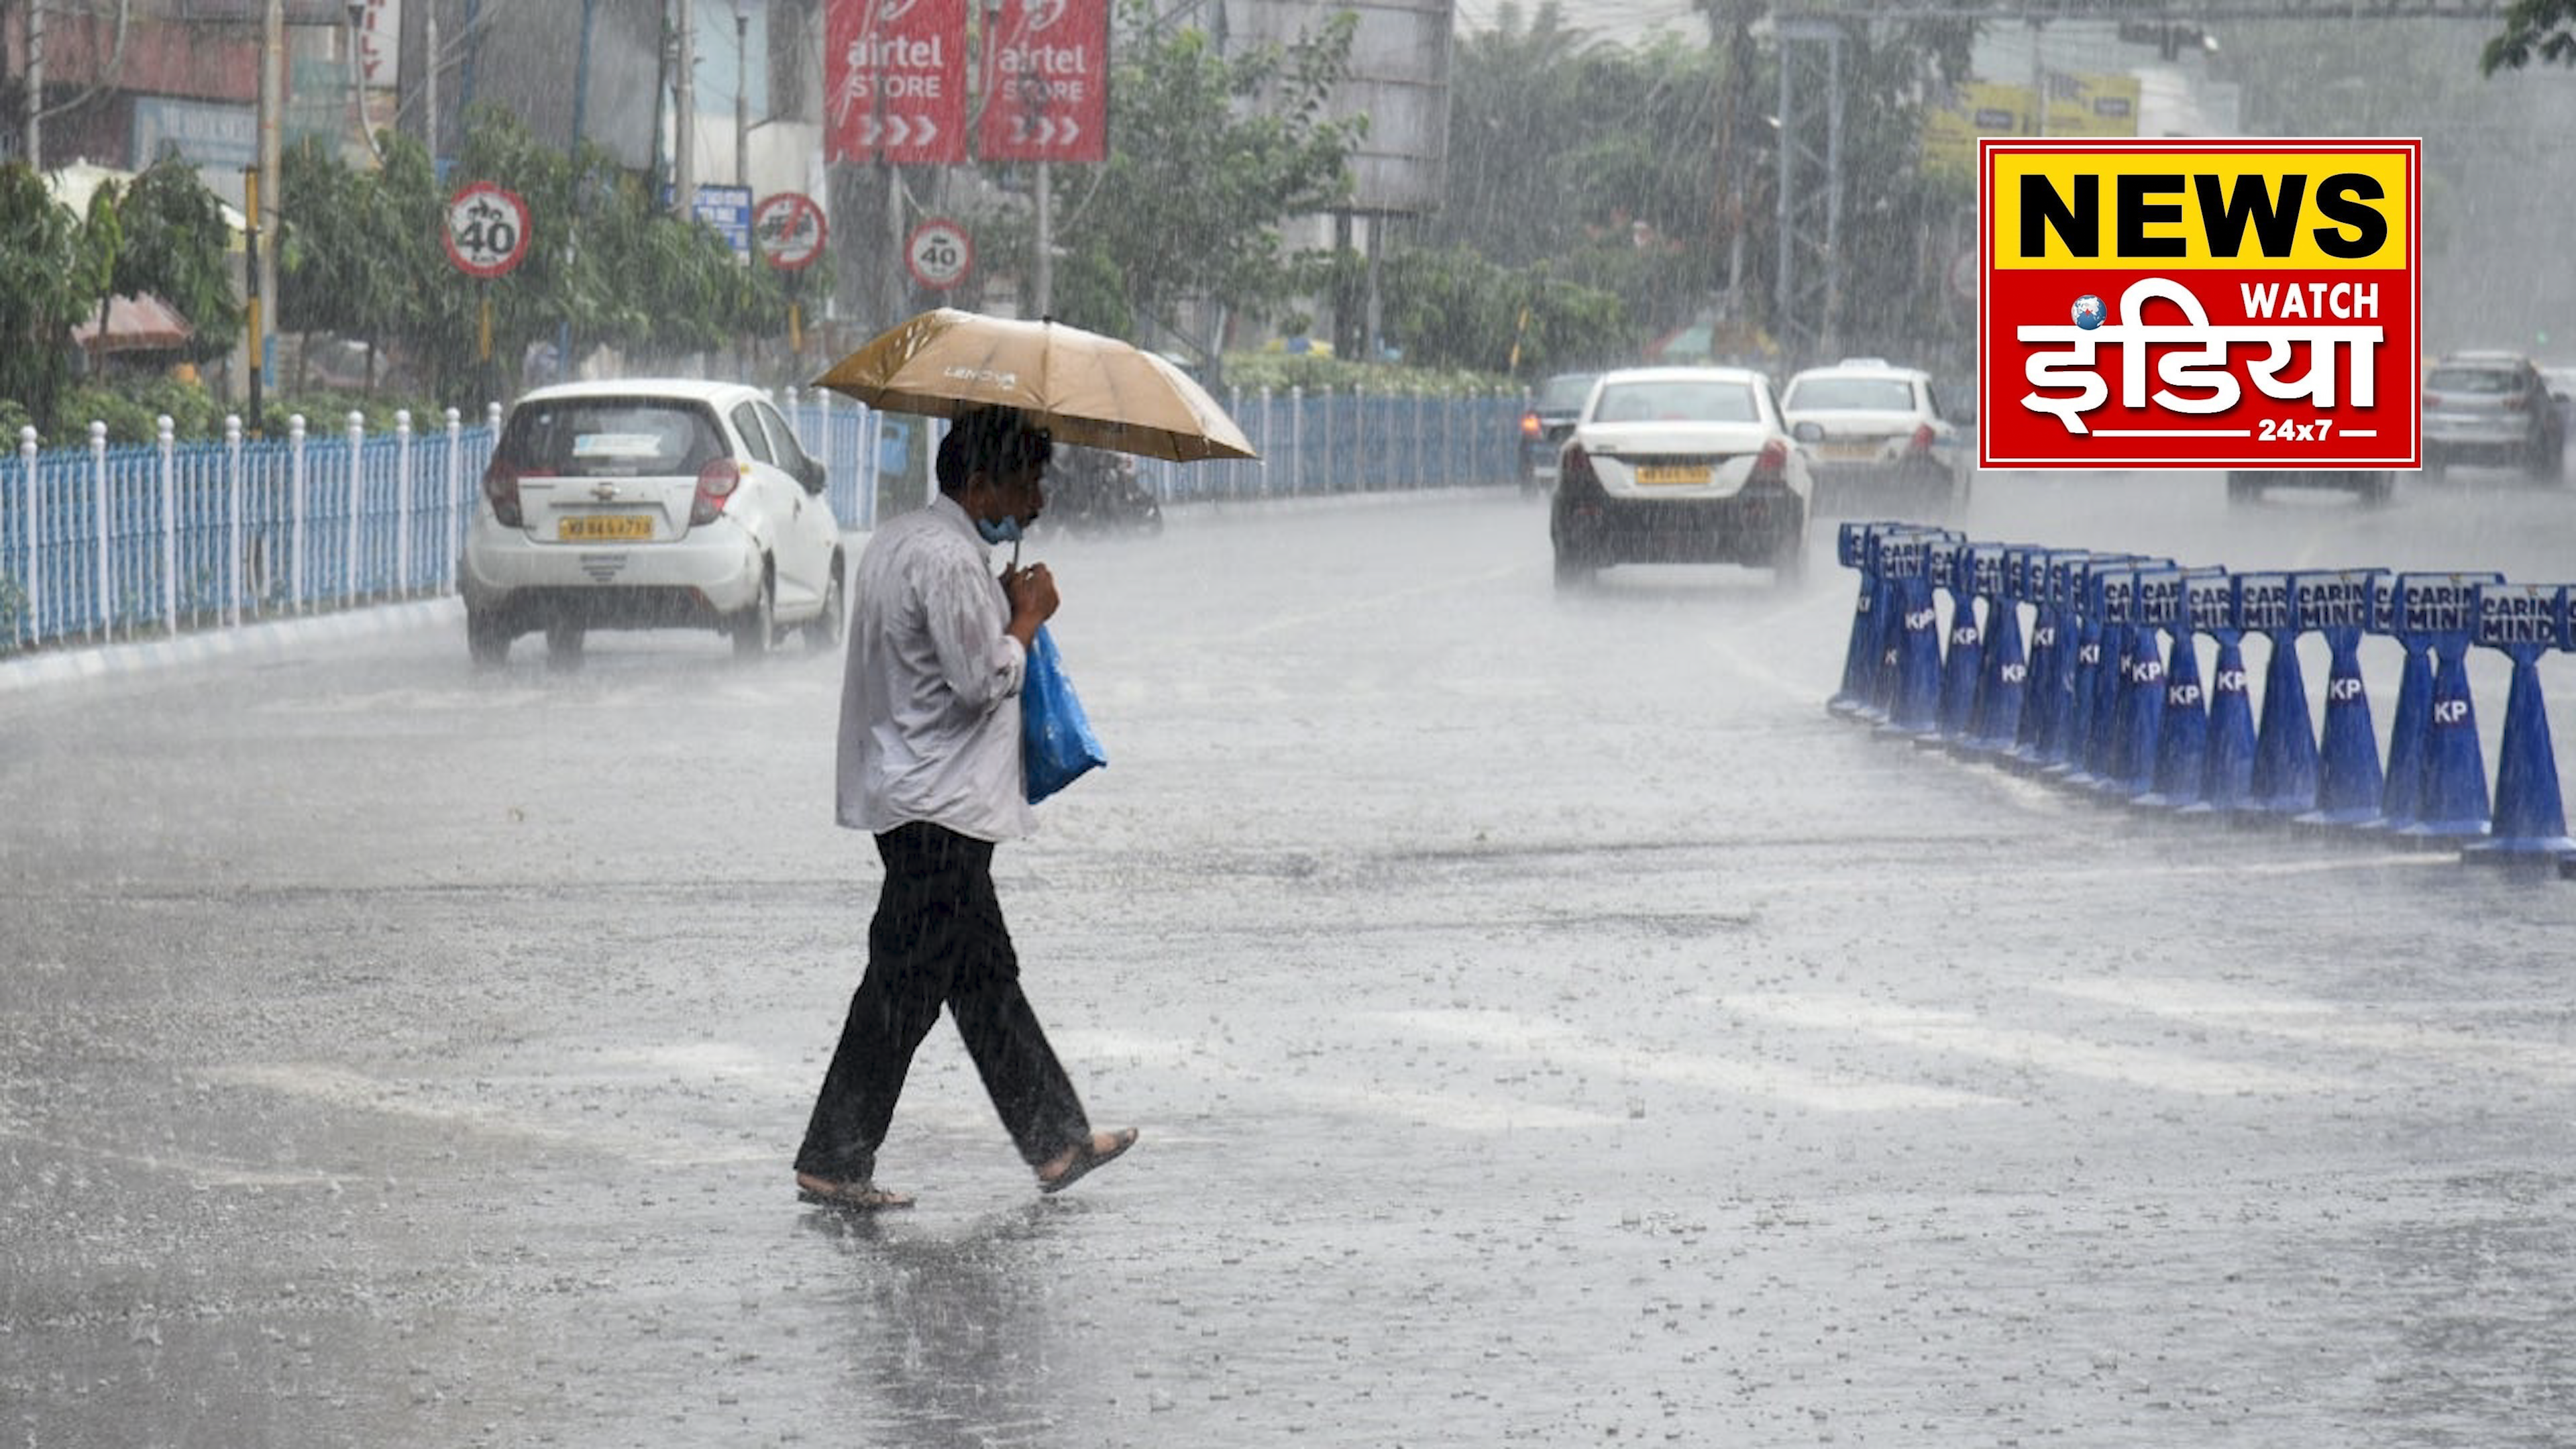 Heavy rain alert in many states, possibility of heavy rain in Delhi between 22 and 24 July